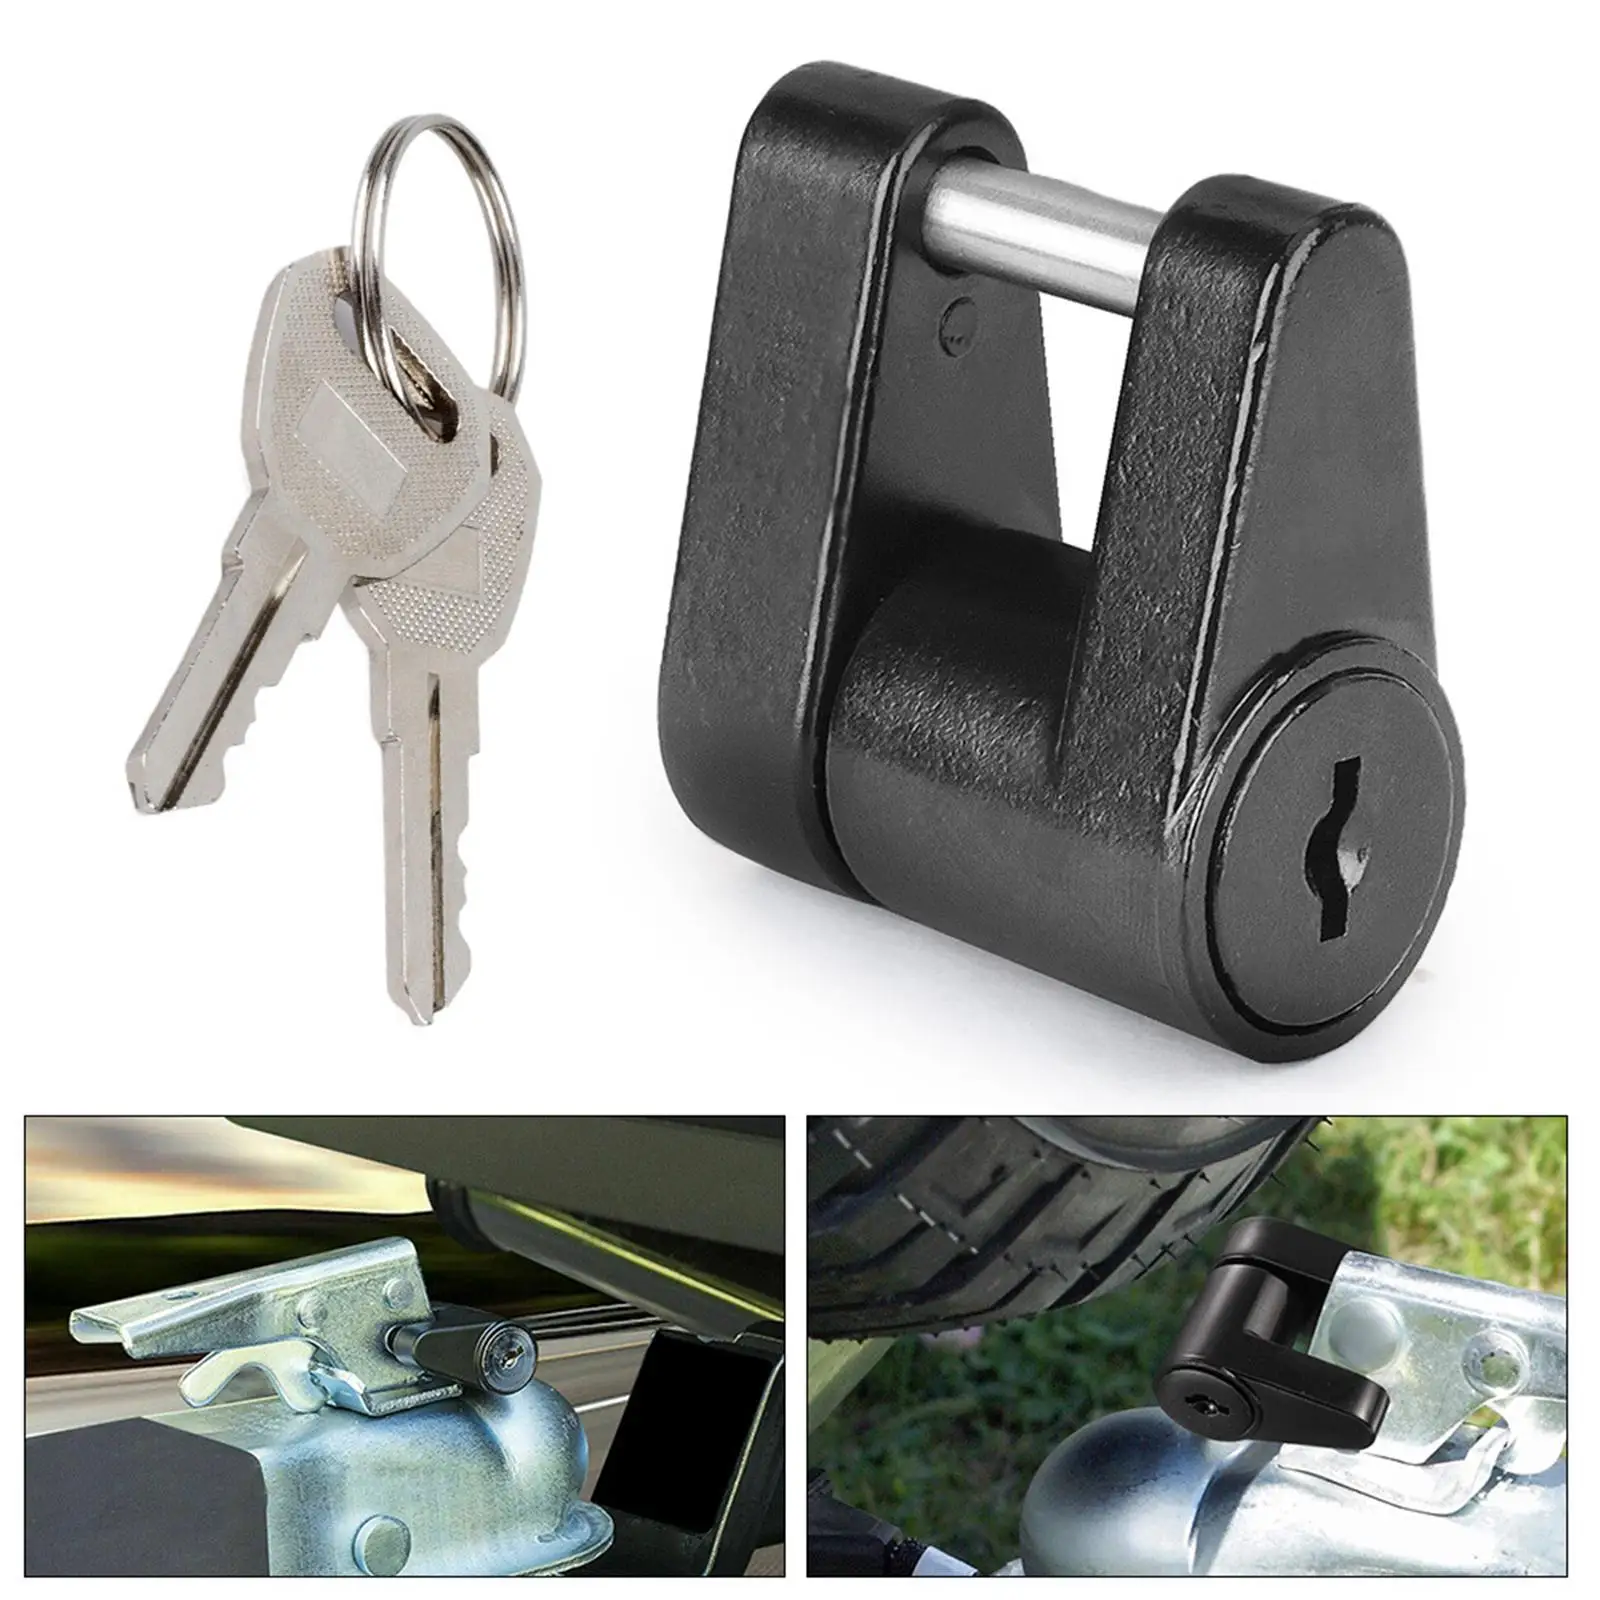 Trailer Hitch Coupler Lock with 2 Keys for Tow Boat Trailers Campers Car Coupling Lock